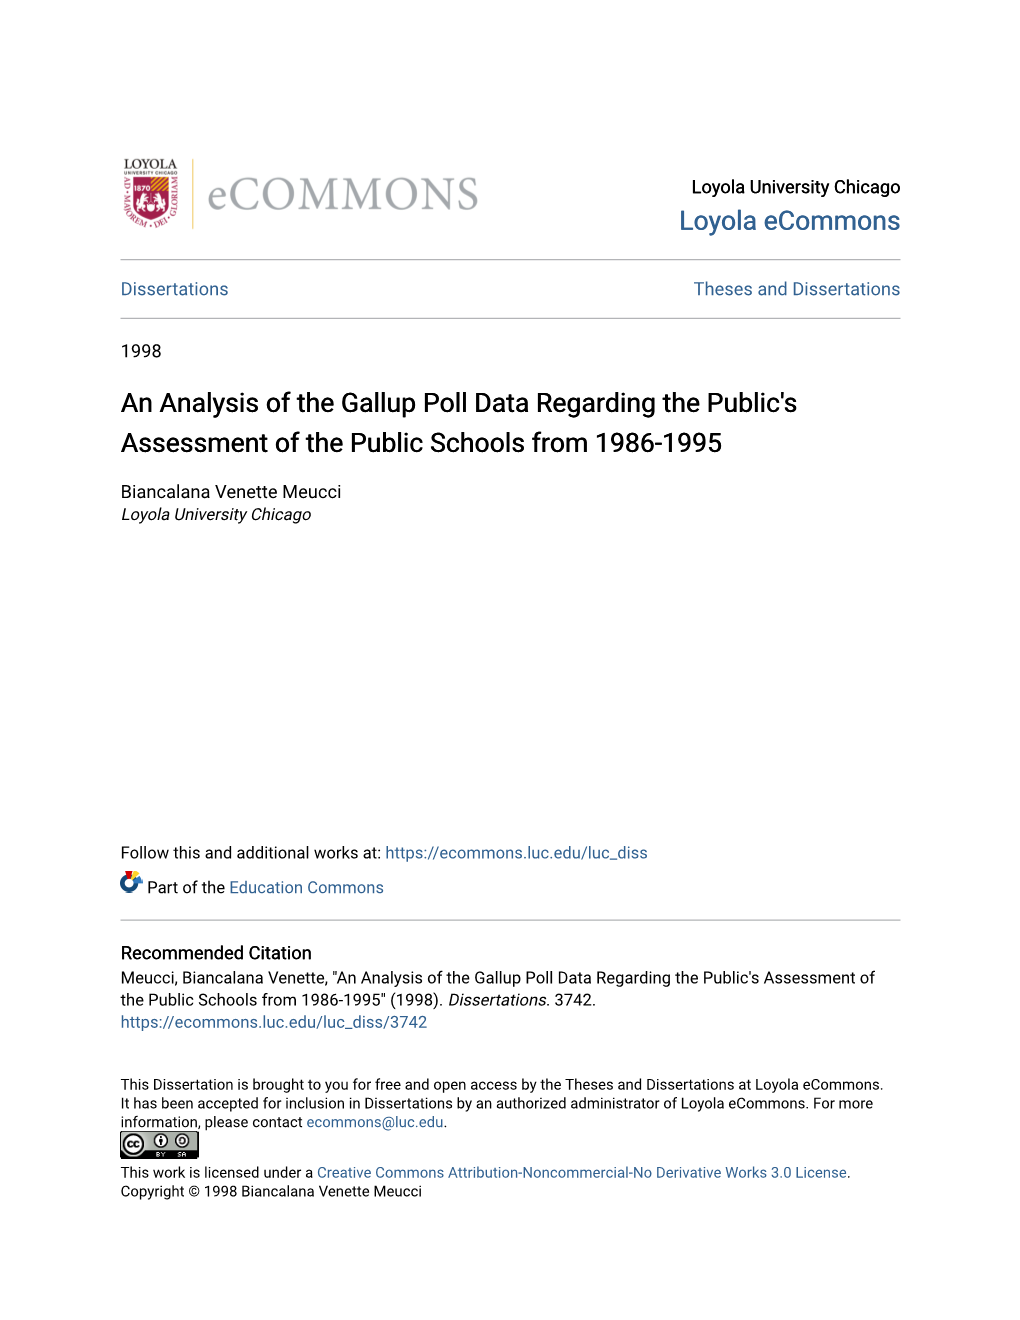 An Analysis of the Gallup Poll Data Regarding the Public's Assessment of the Public Schools from 1986-1995